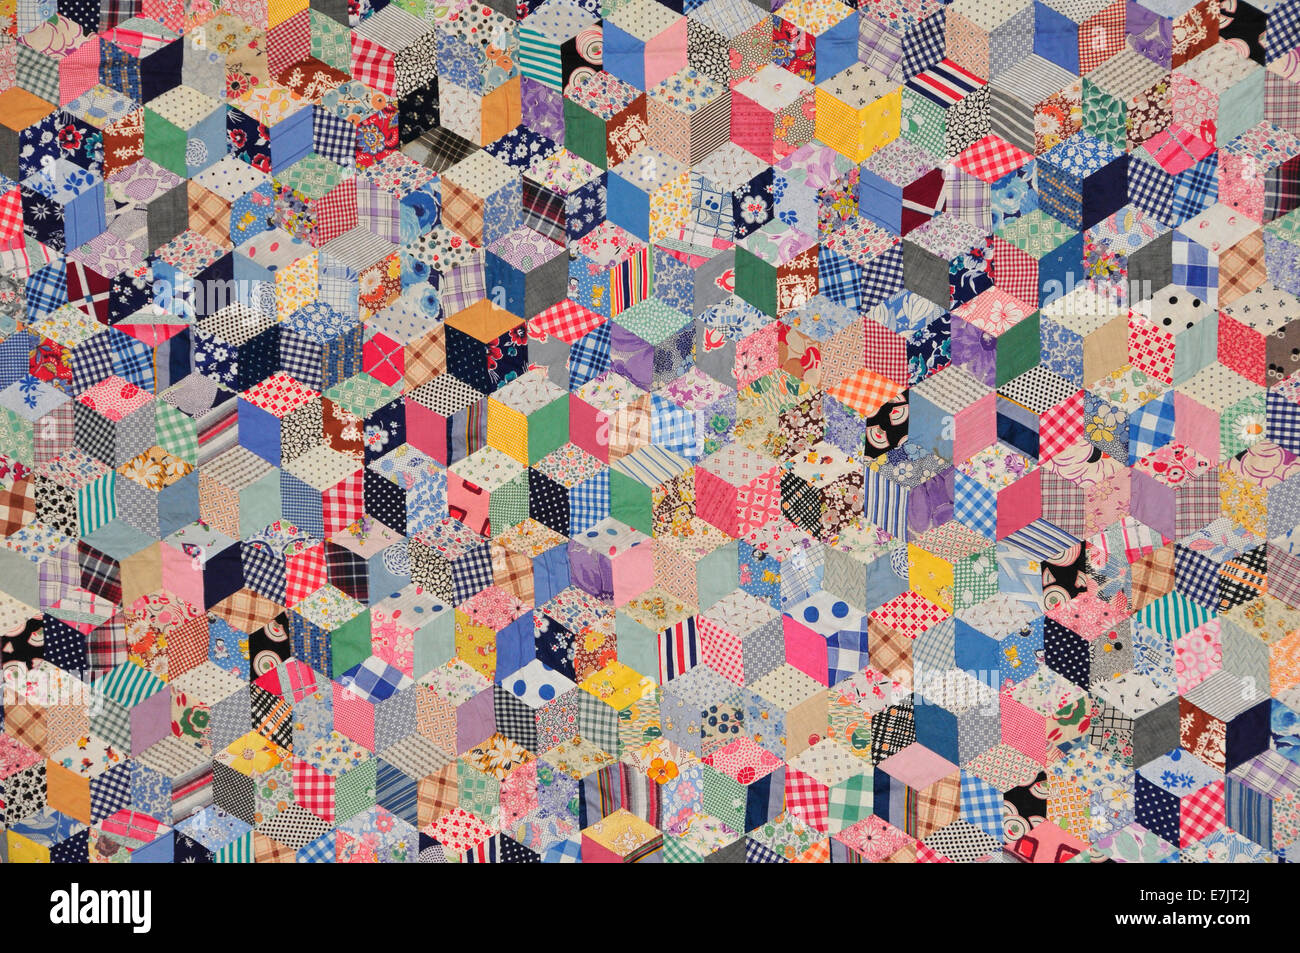 Detail of patchwork quilts. Stock Photo